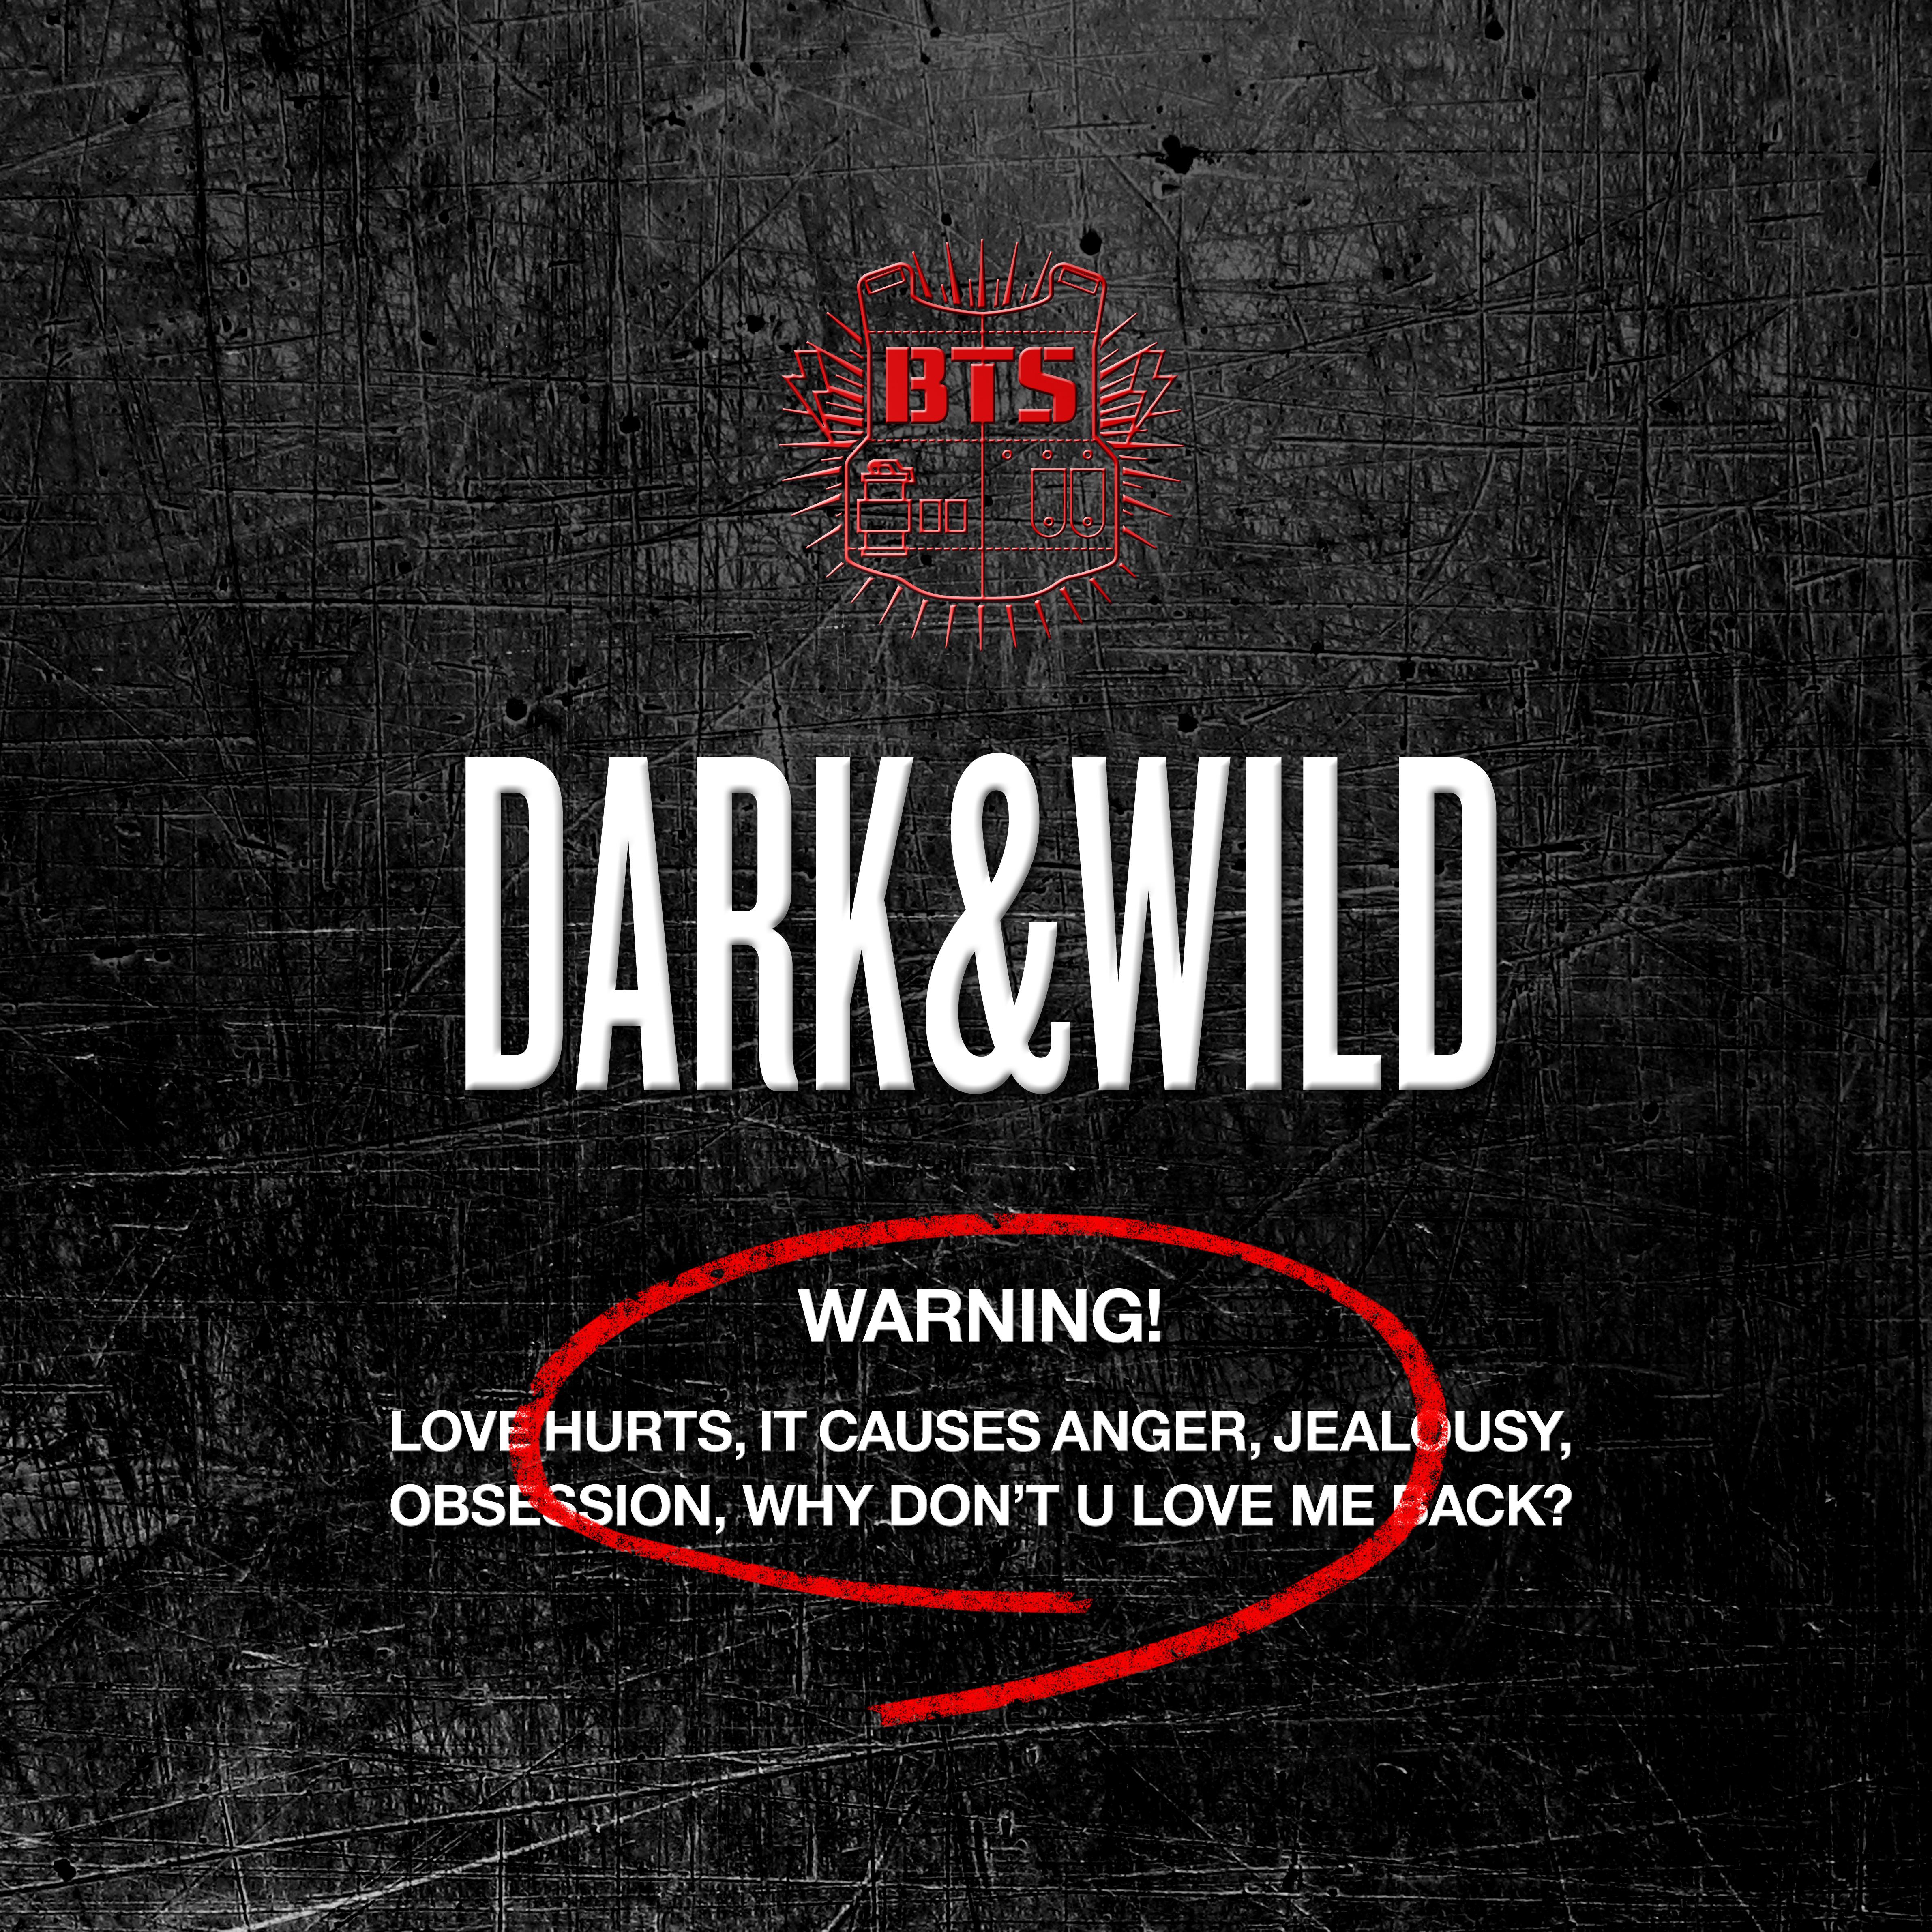 Could you turn off your cell phone歌词 歌手BTS (防弹少年团)-专辑DARK&WILD-单曲《Could you turn off your cell phone》LRC歌词下载